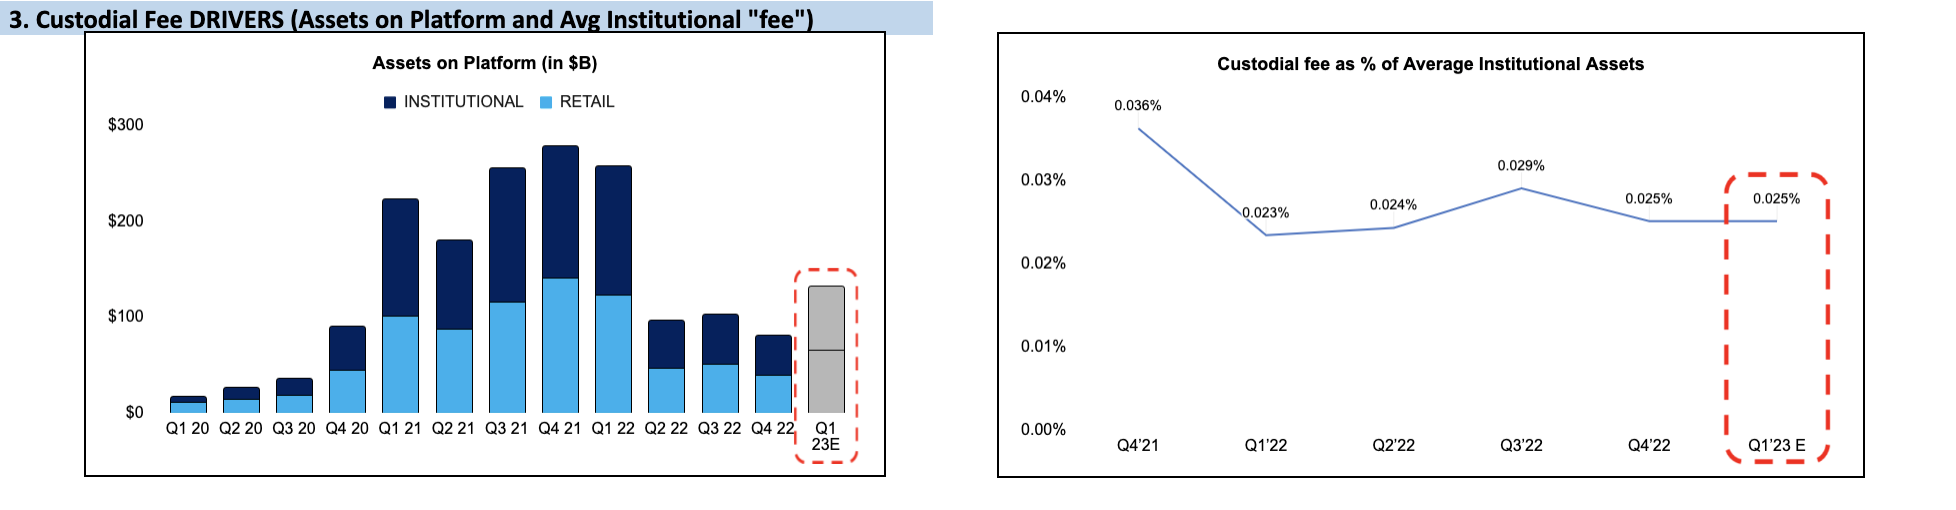 Assets on Platform and Custodial Fee Take Rate (Last Quarters and Q1´23E)